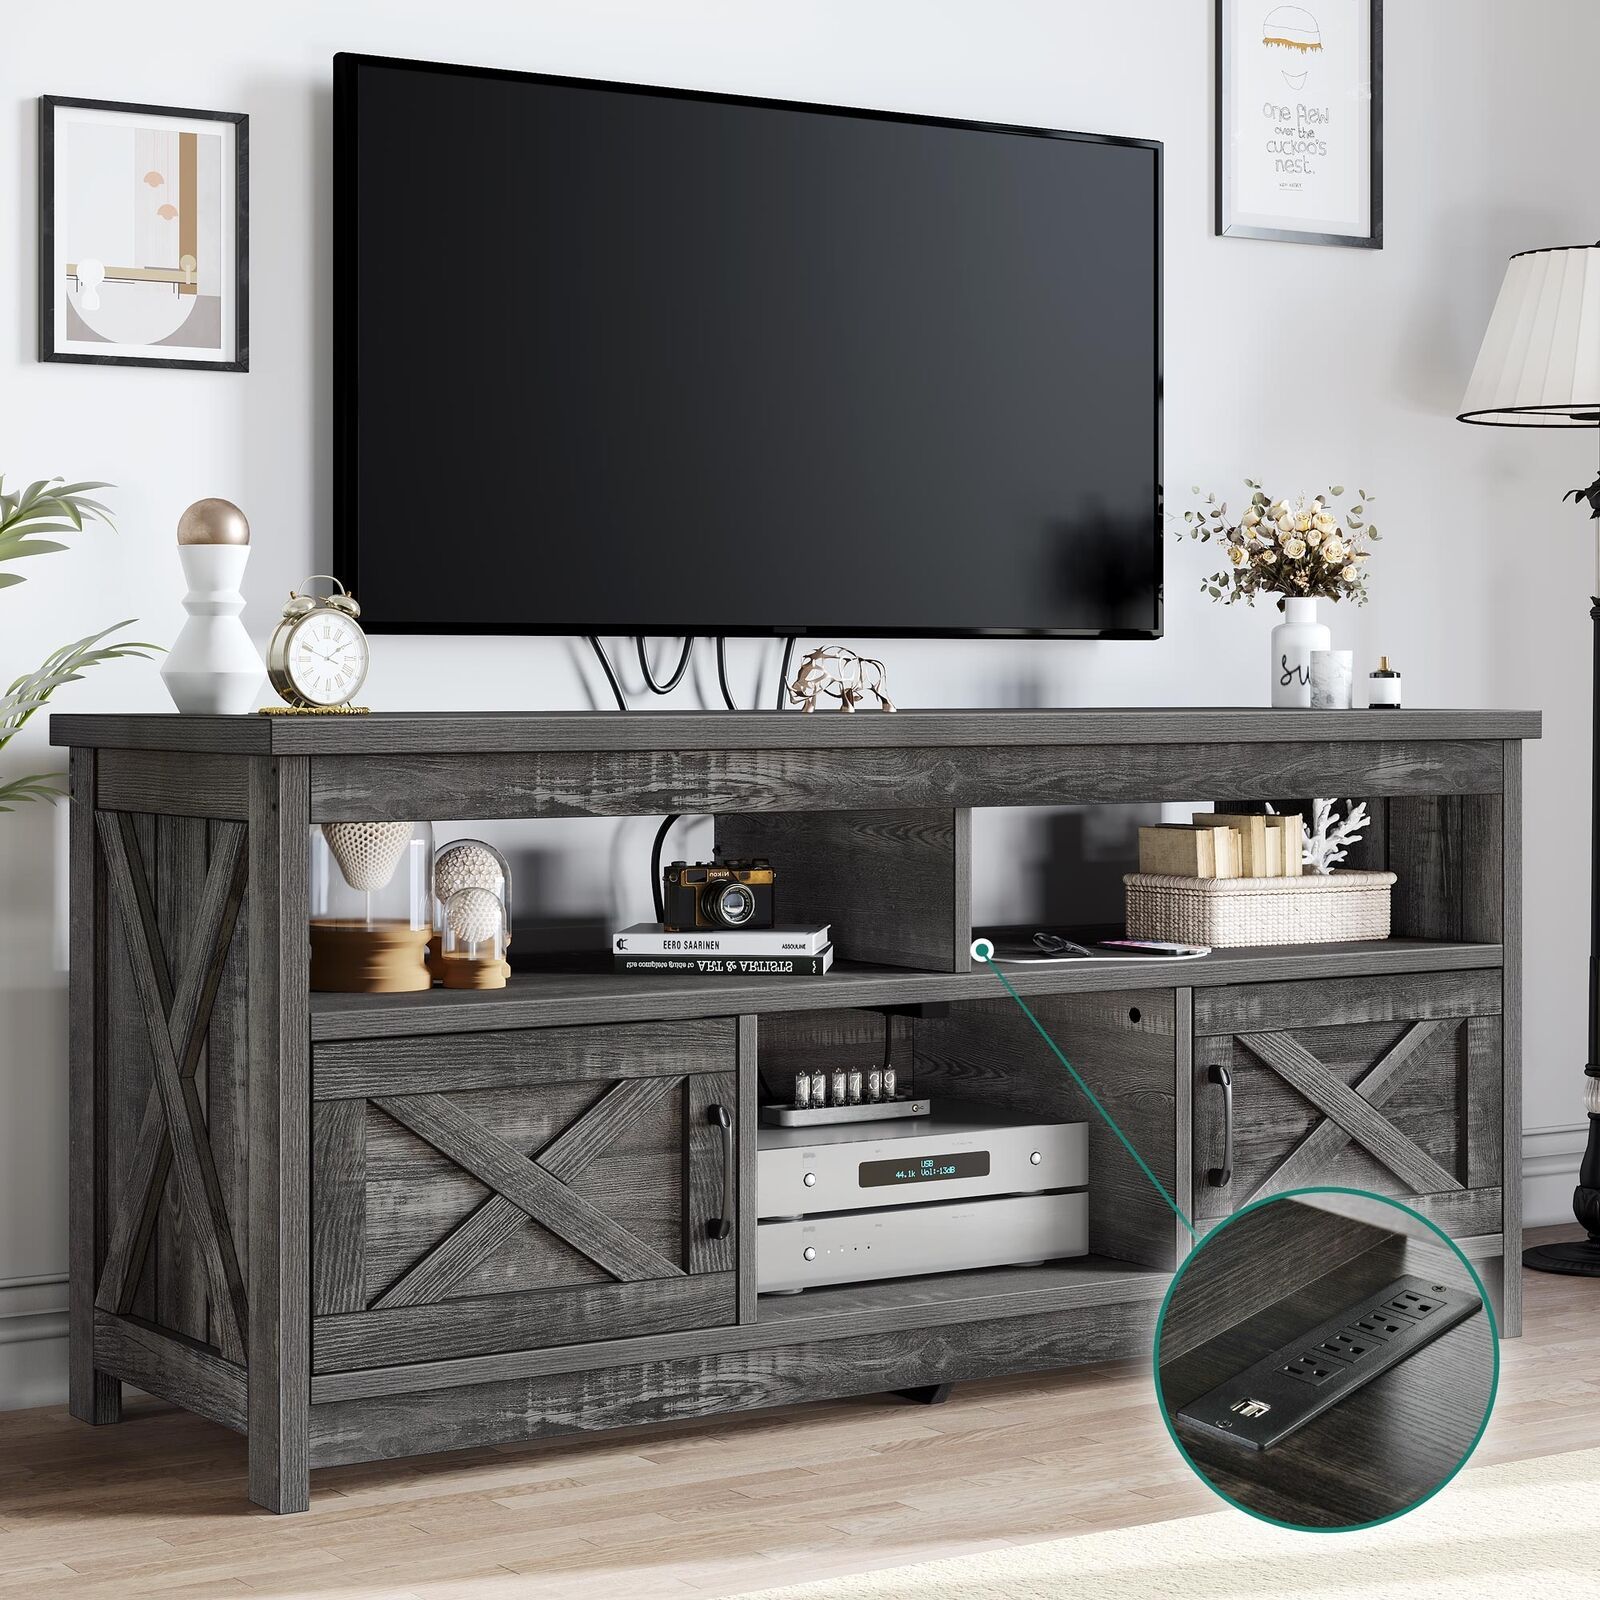 Farmhouse Tv Stand For 65 In With Power Outlet Media Console W/ Storage  Cabinet | Ebay Within Farmhouse Stands With Shelves (View 10 of 15)